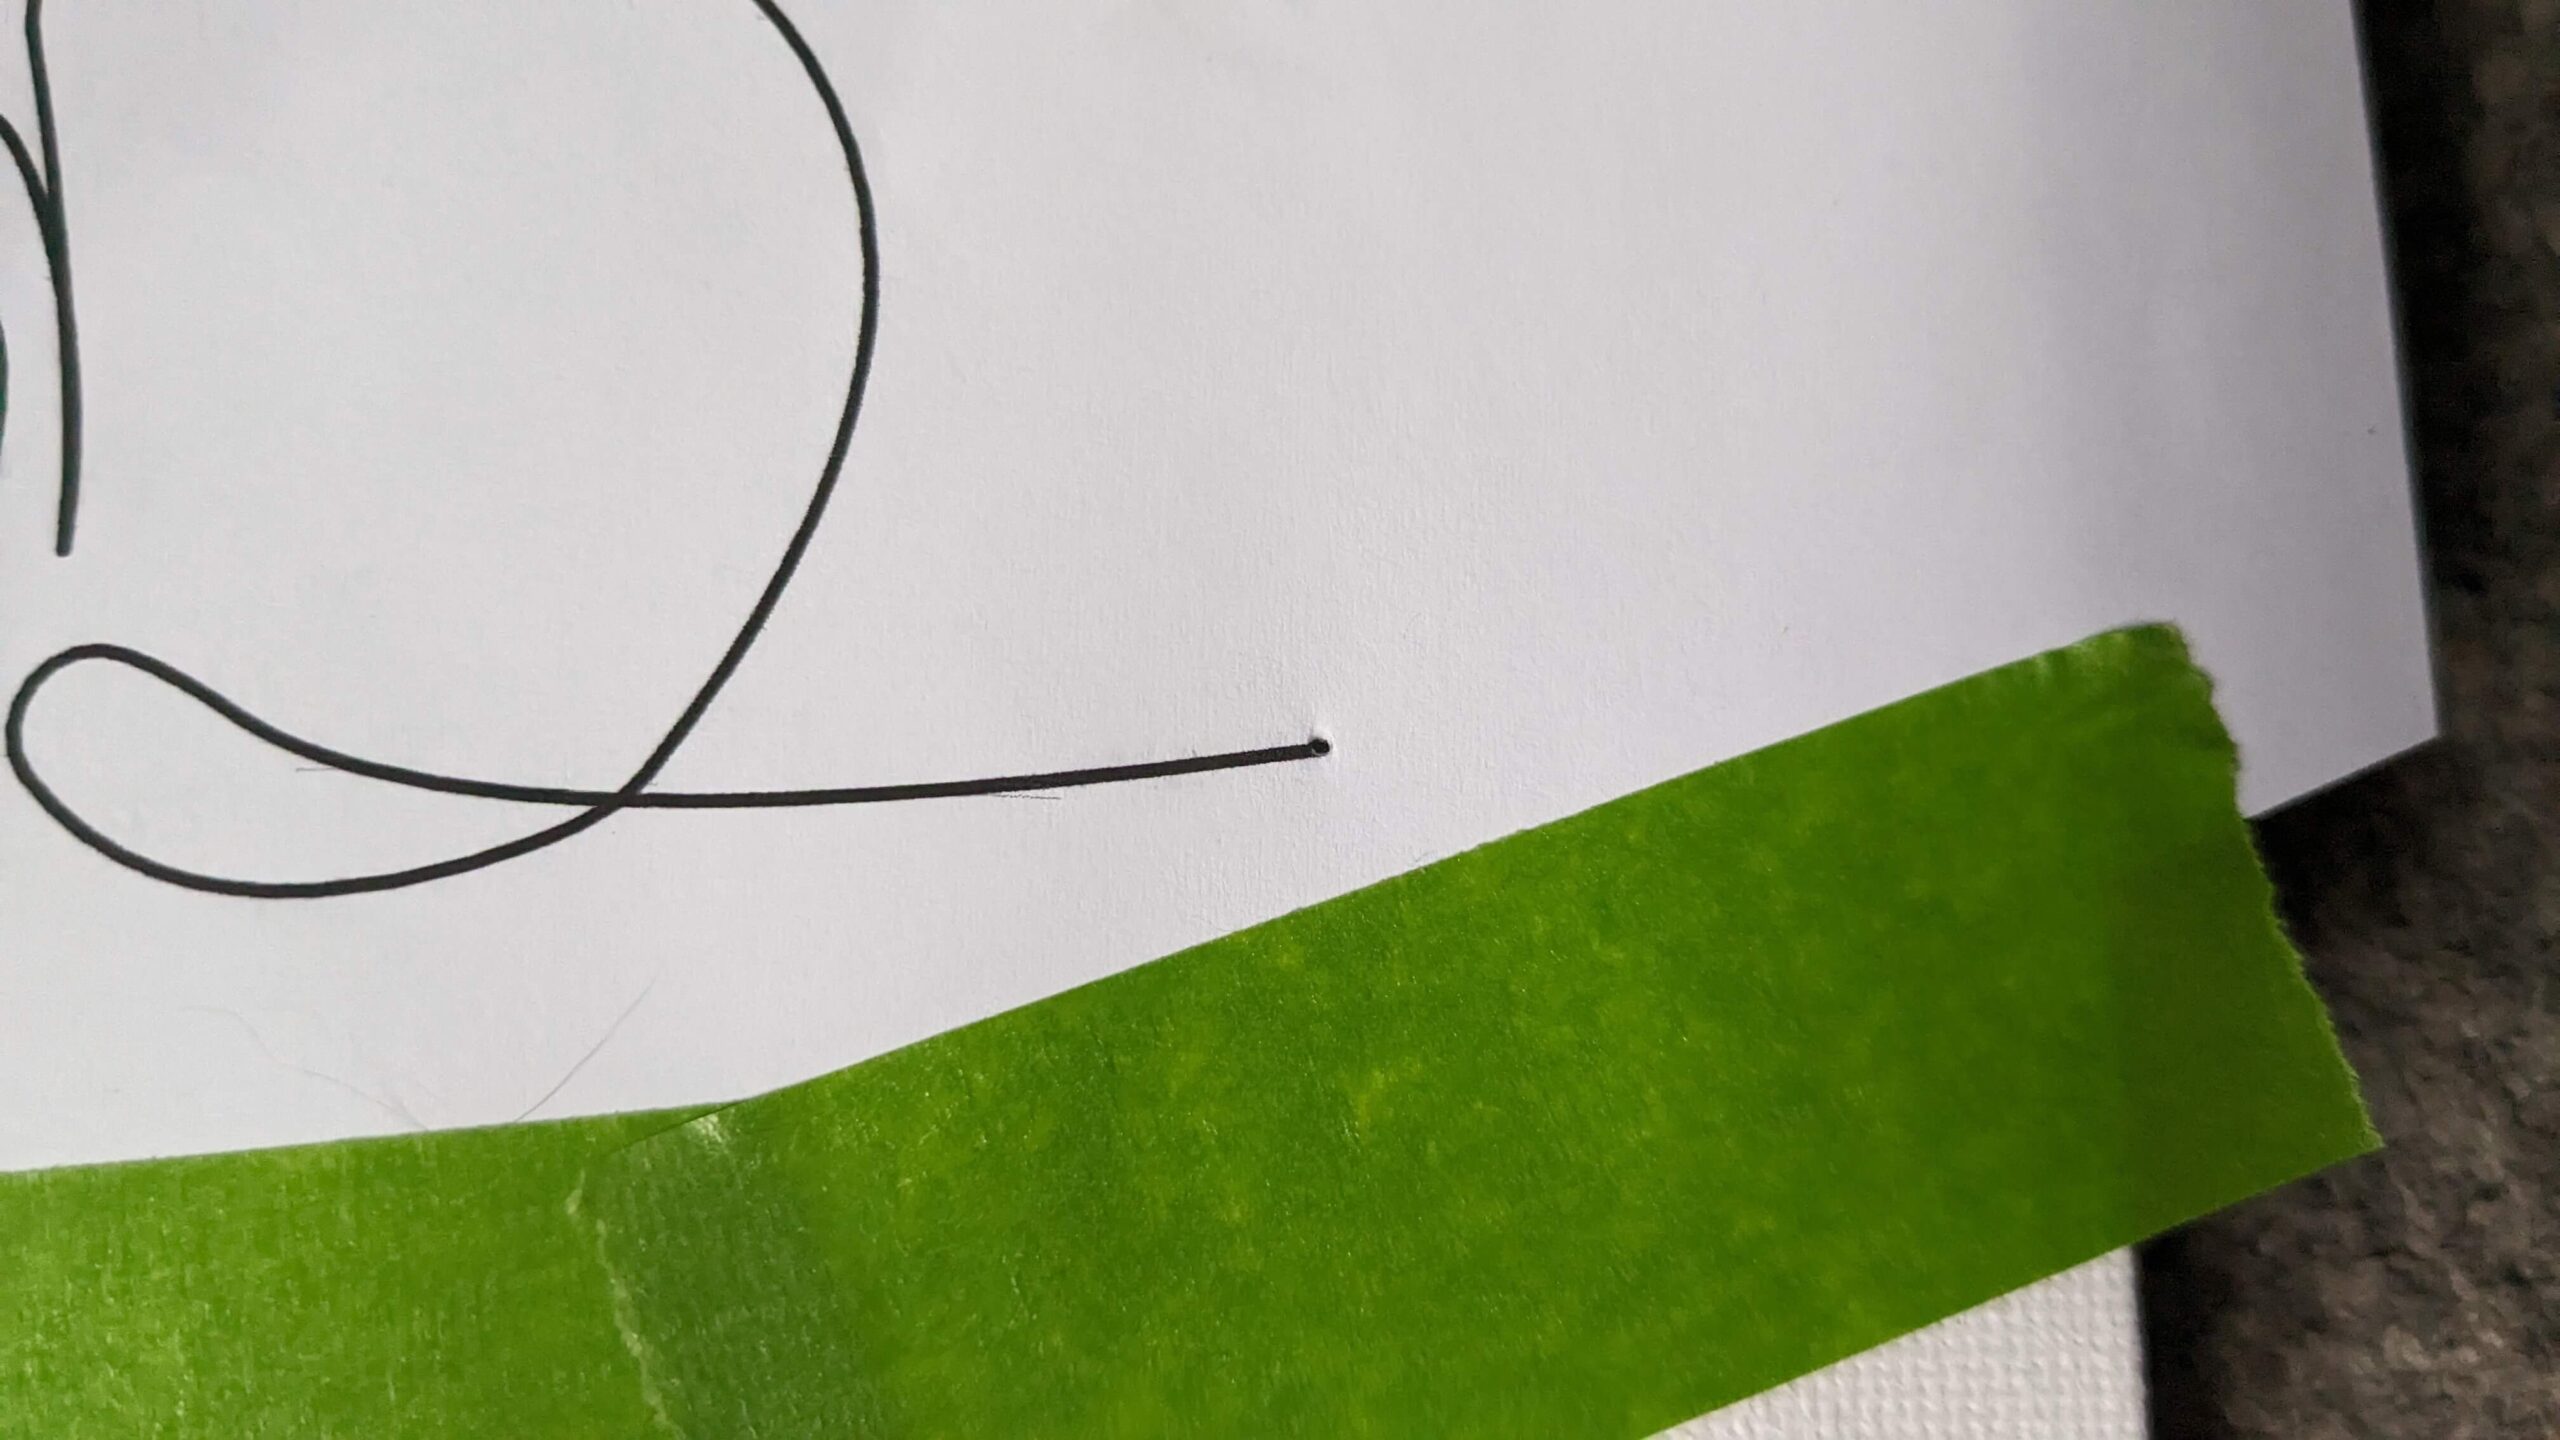 close up of a line on paper with a small hole and green painters tape